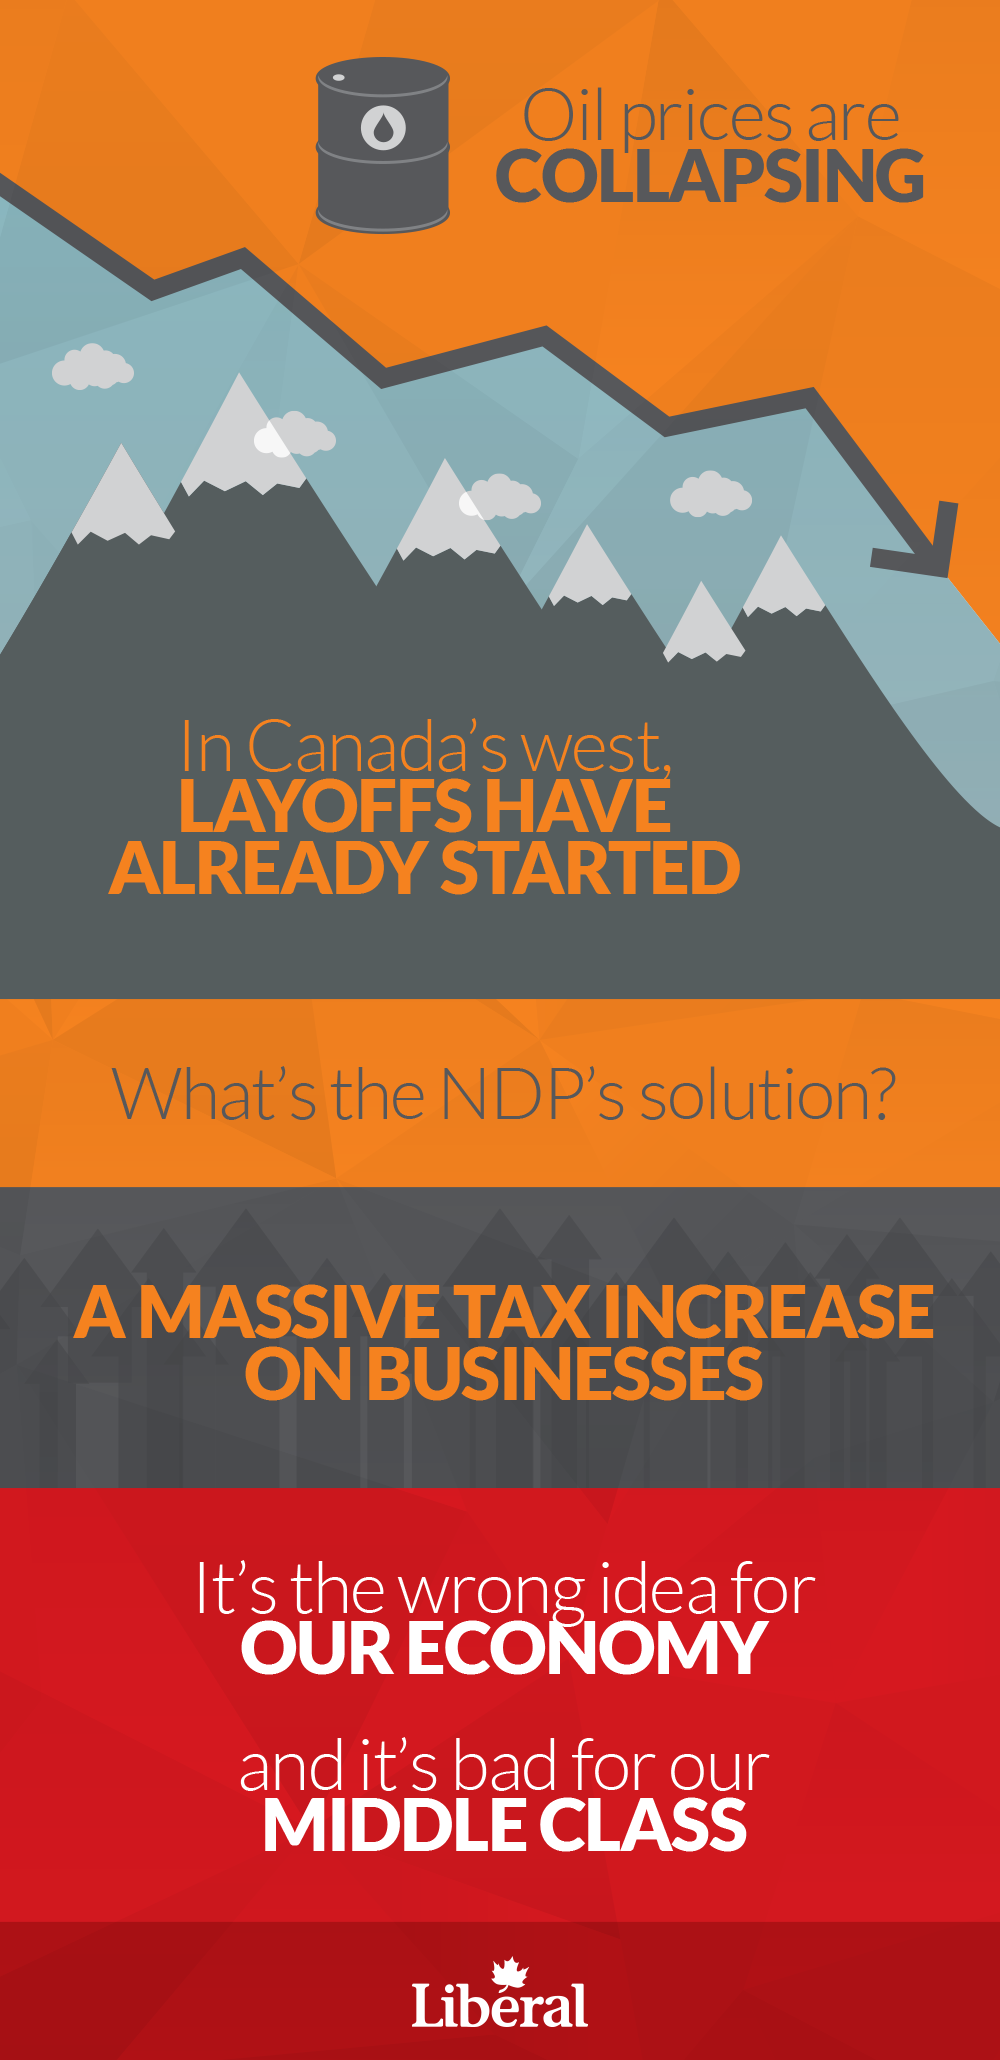 Oli prices are collapsing. In Canada’s west, layoffs have already started. What’s the NDP solution?  A massive tax increase on businesses It’s the wrong idea for our economy and it’s bad for our middle class.